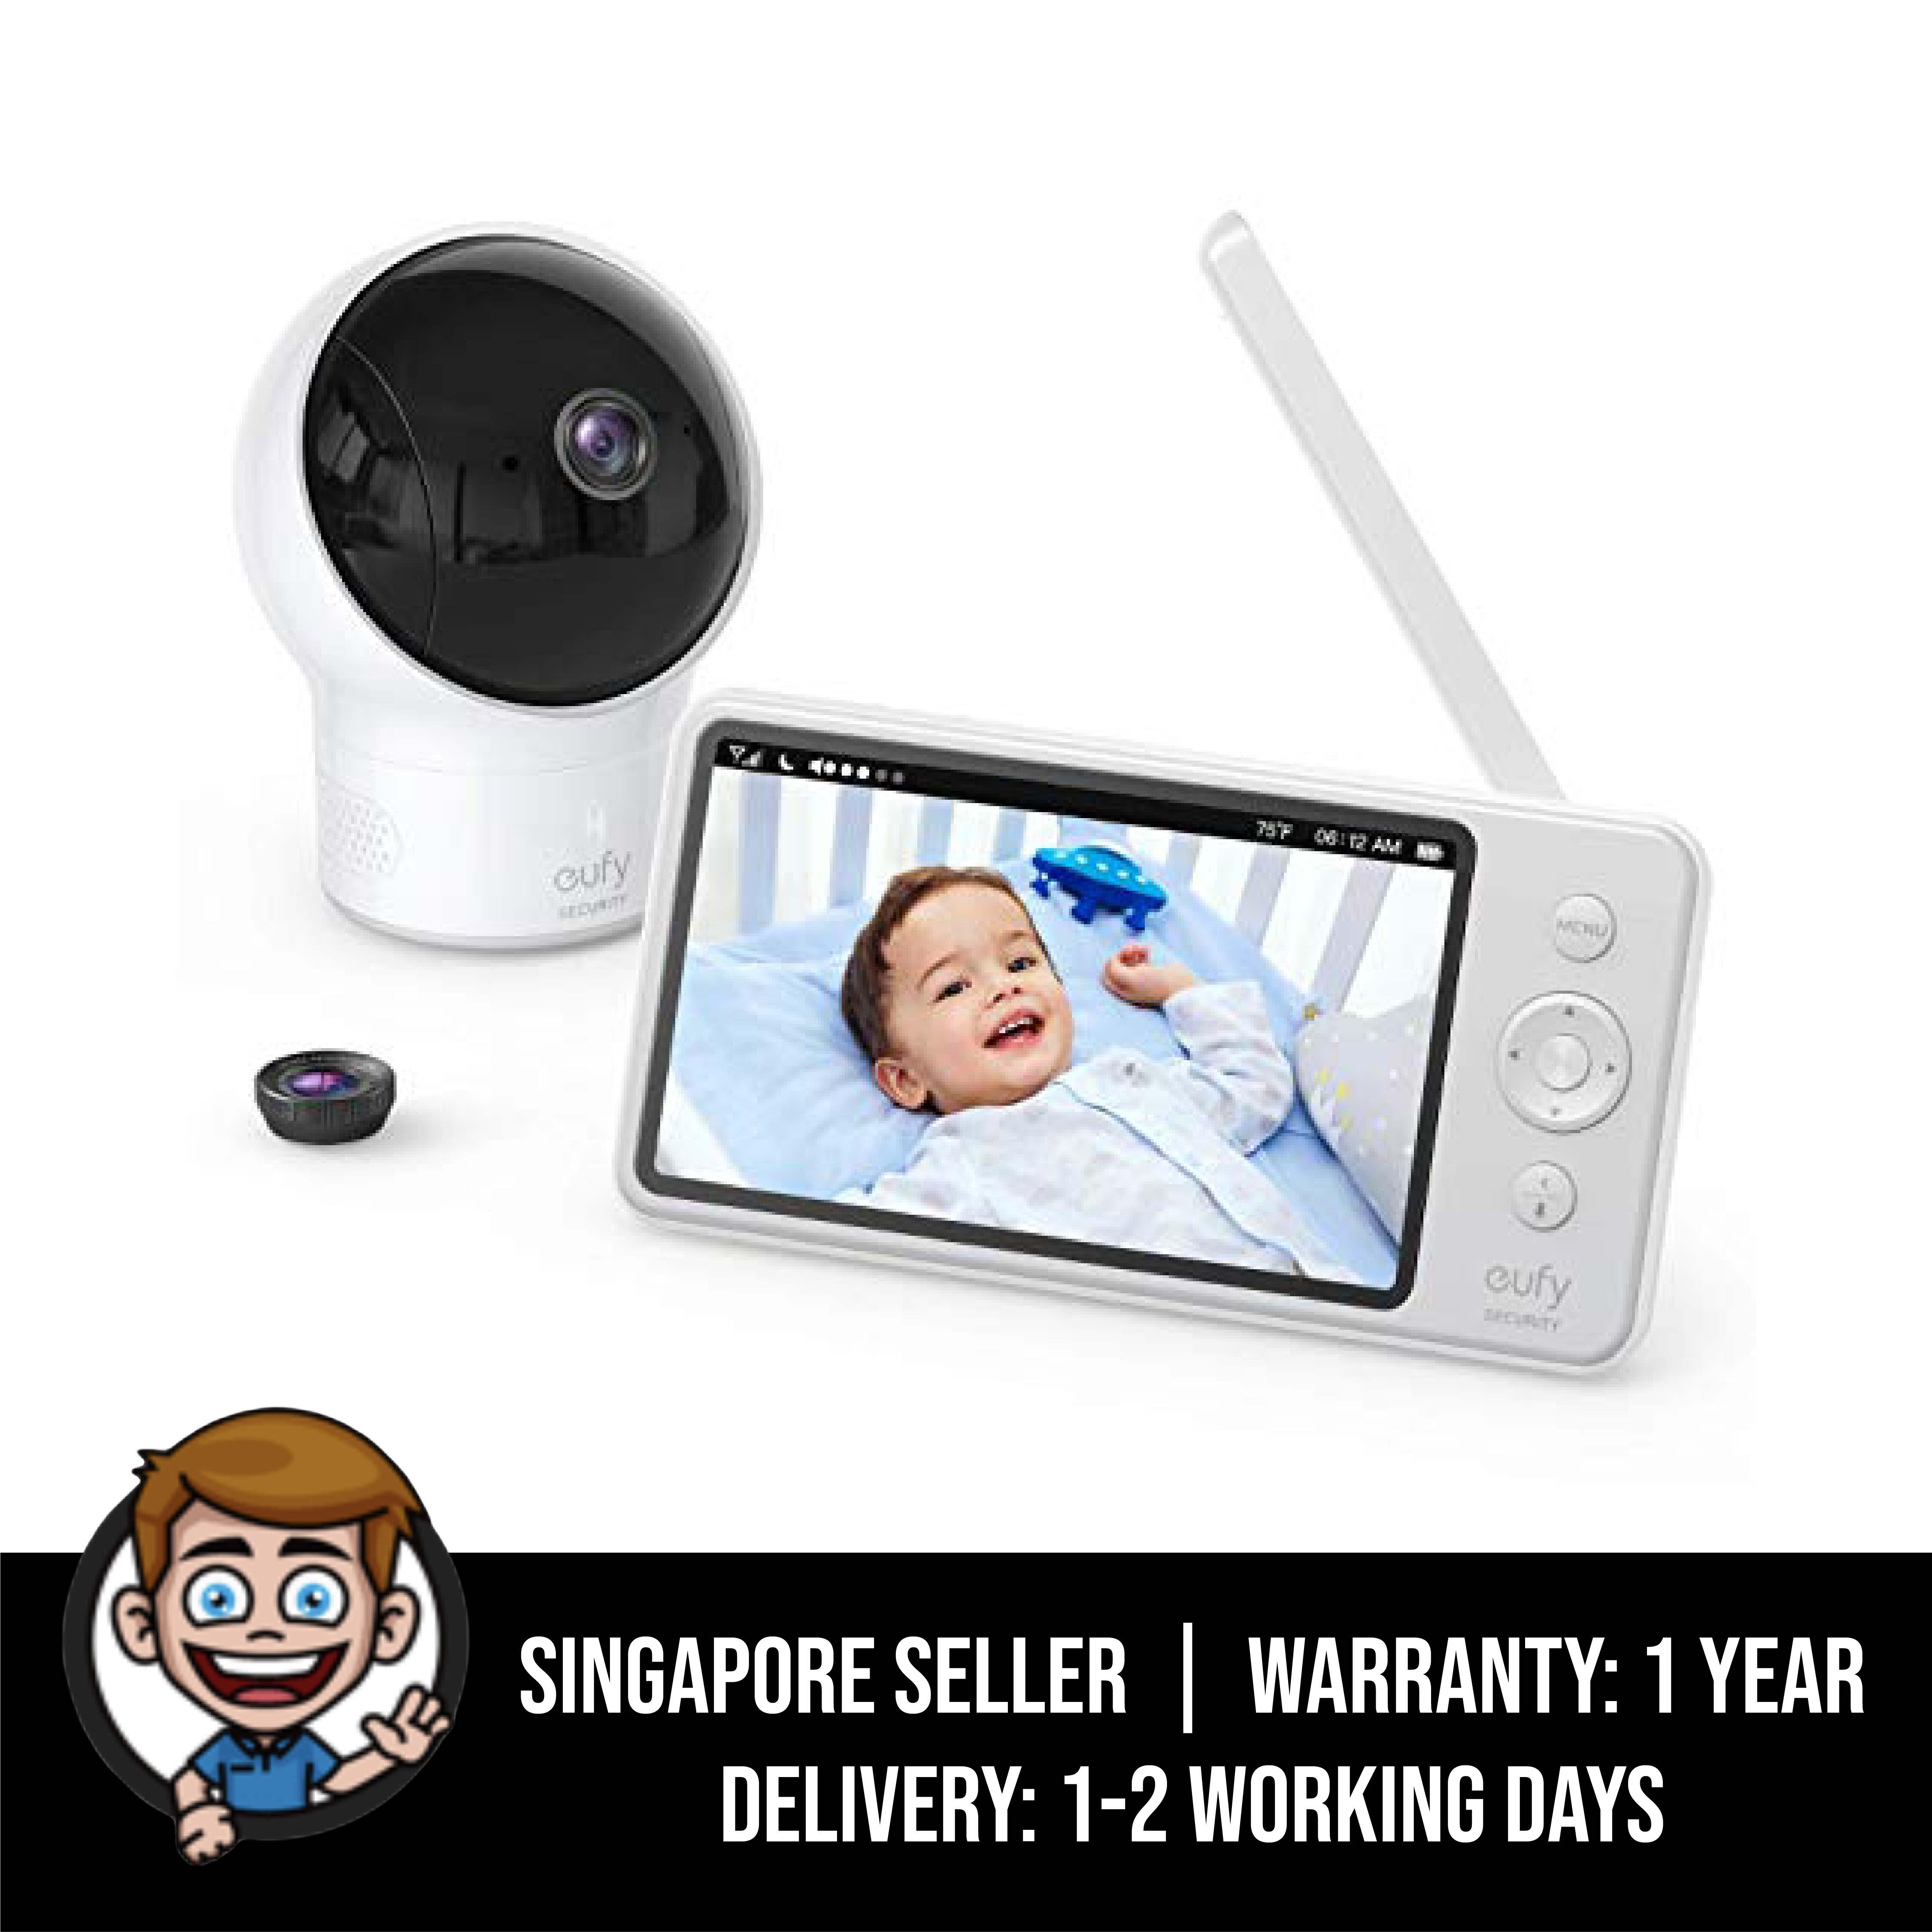 Ideal for New Moms 5 LCD Display Day-Long Battery Baby Monitor eufy Security SpaceView Video Baby Monitor 720p HD Resolution 110/° Wide-Angle Lens Included Night Vision